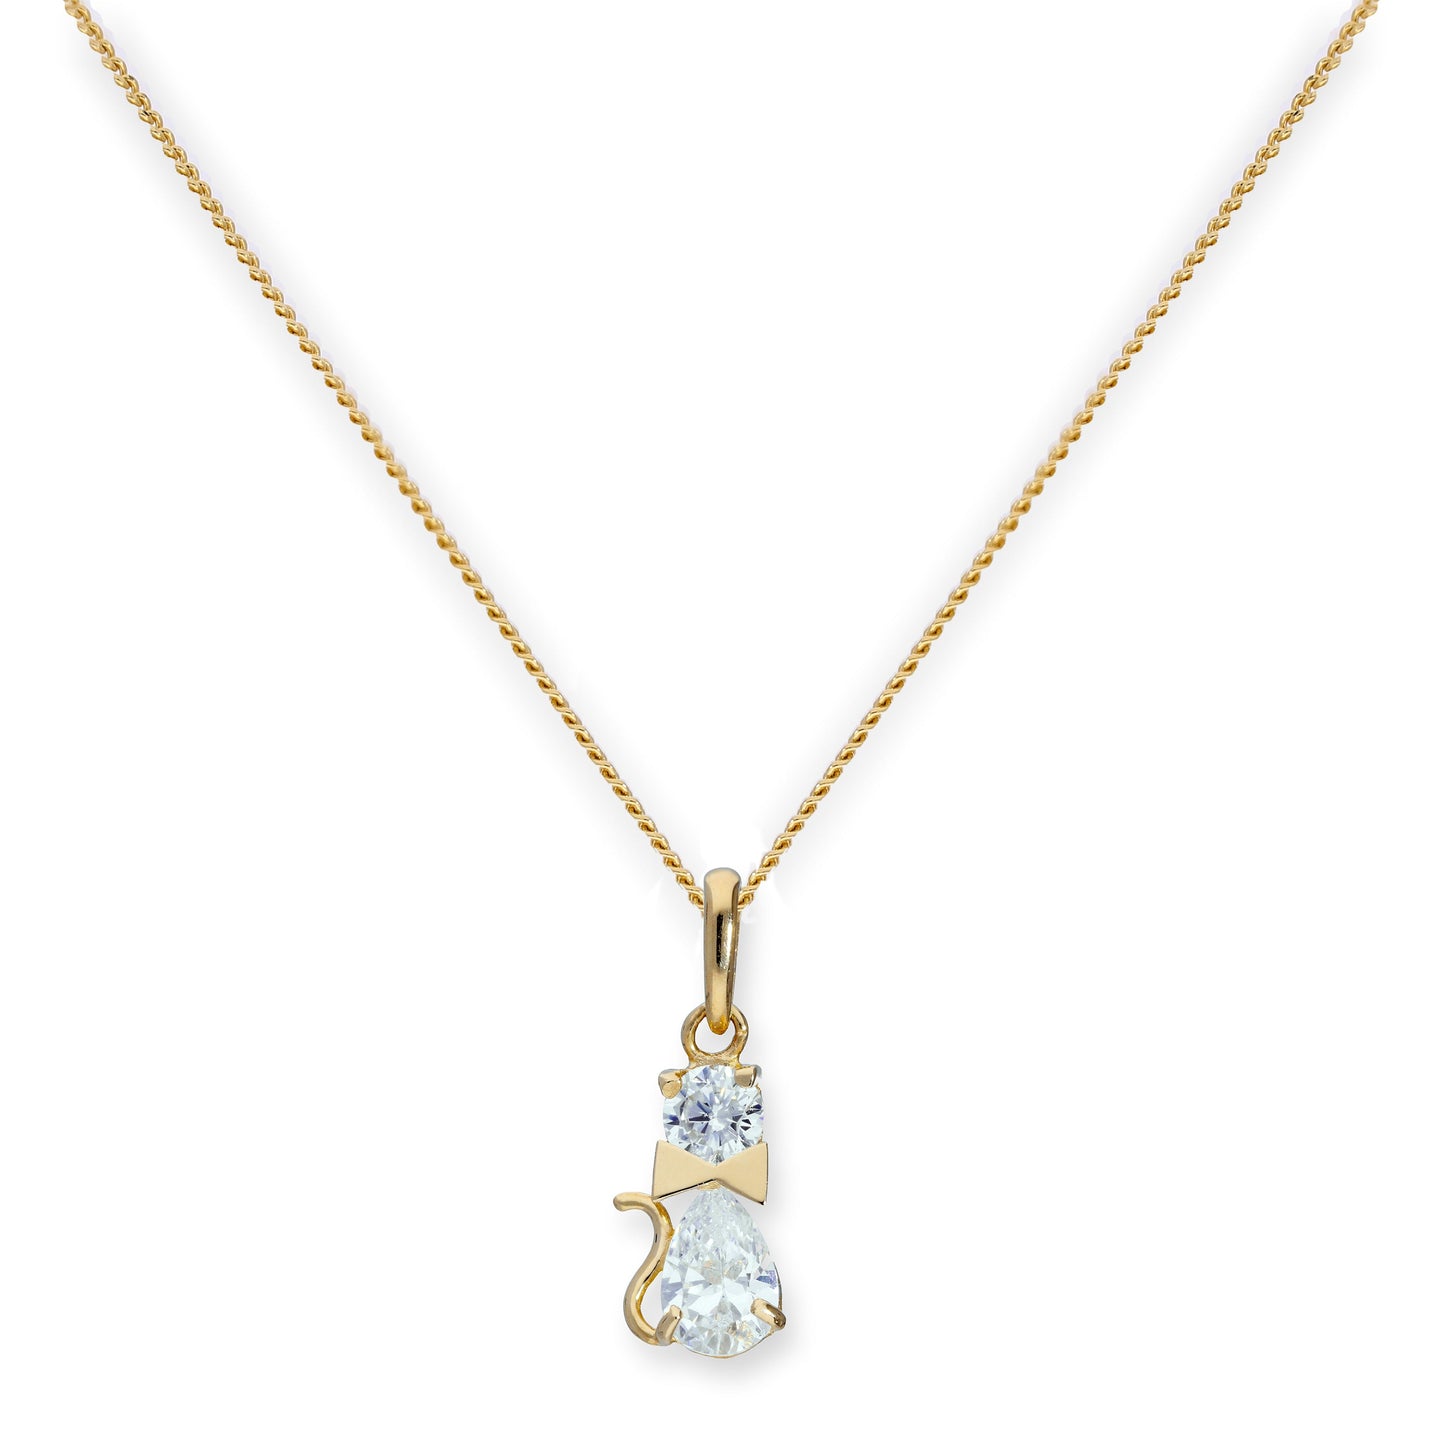 9ct Gold & Clear CZ Crystal Cat w Bow Collar Pendant Necklace 16 - 20 Inches